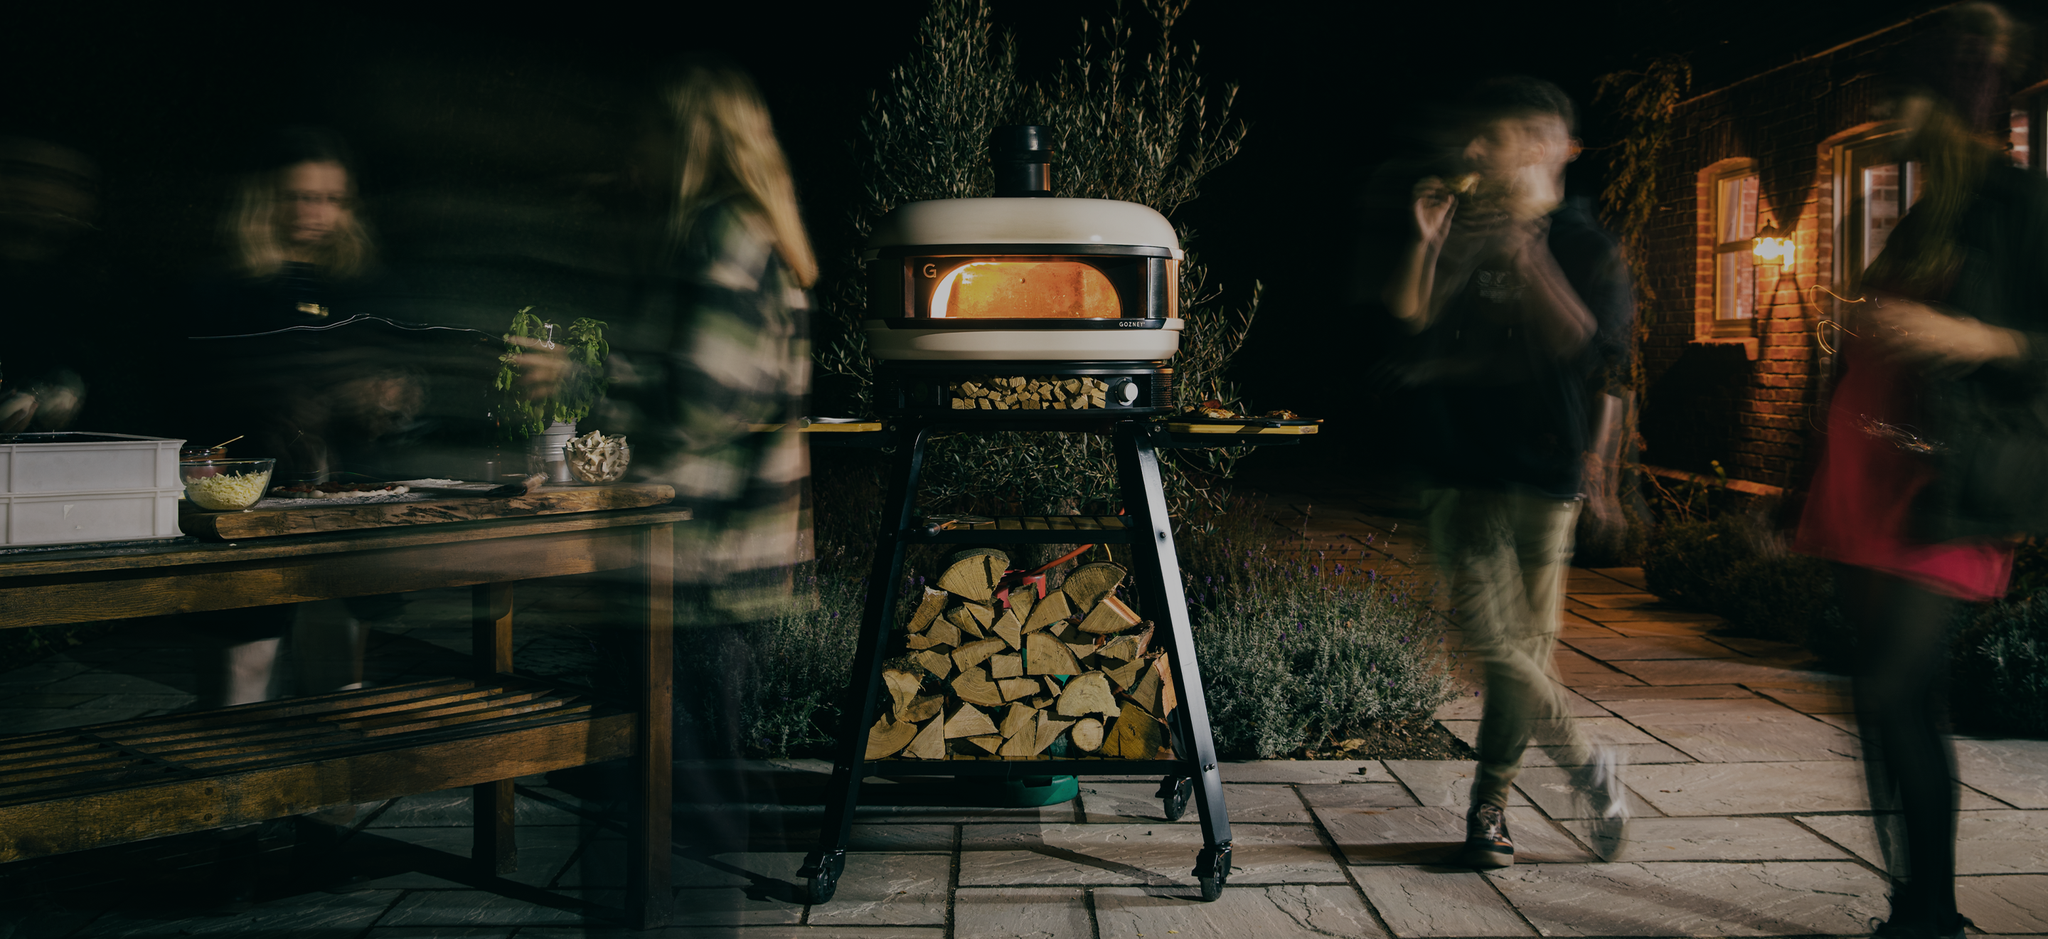 Pizza party at night with lit pizza oven